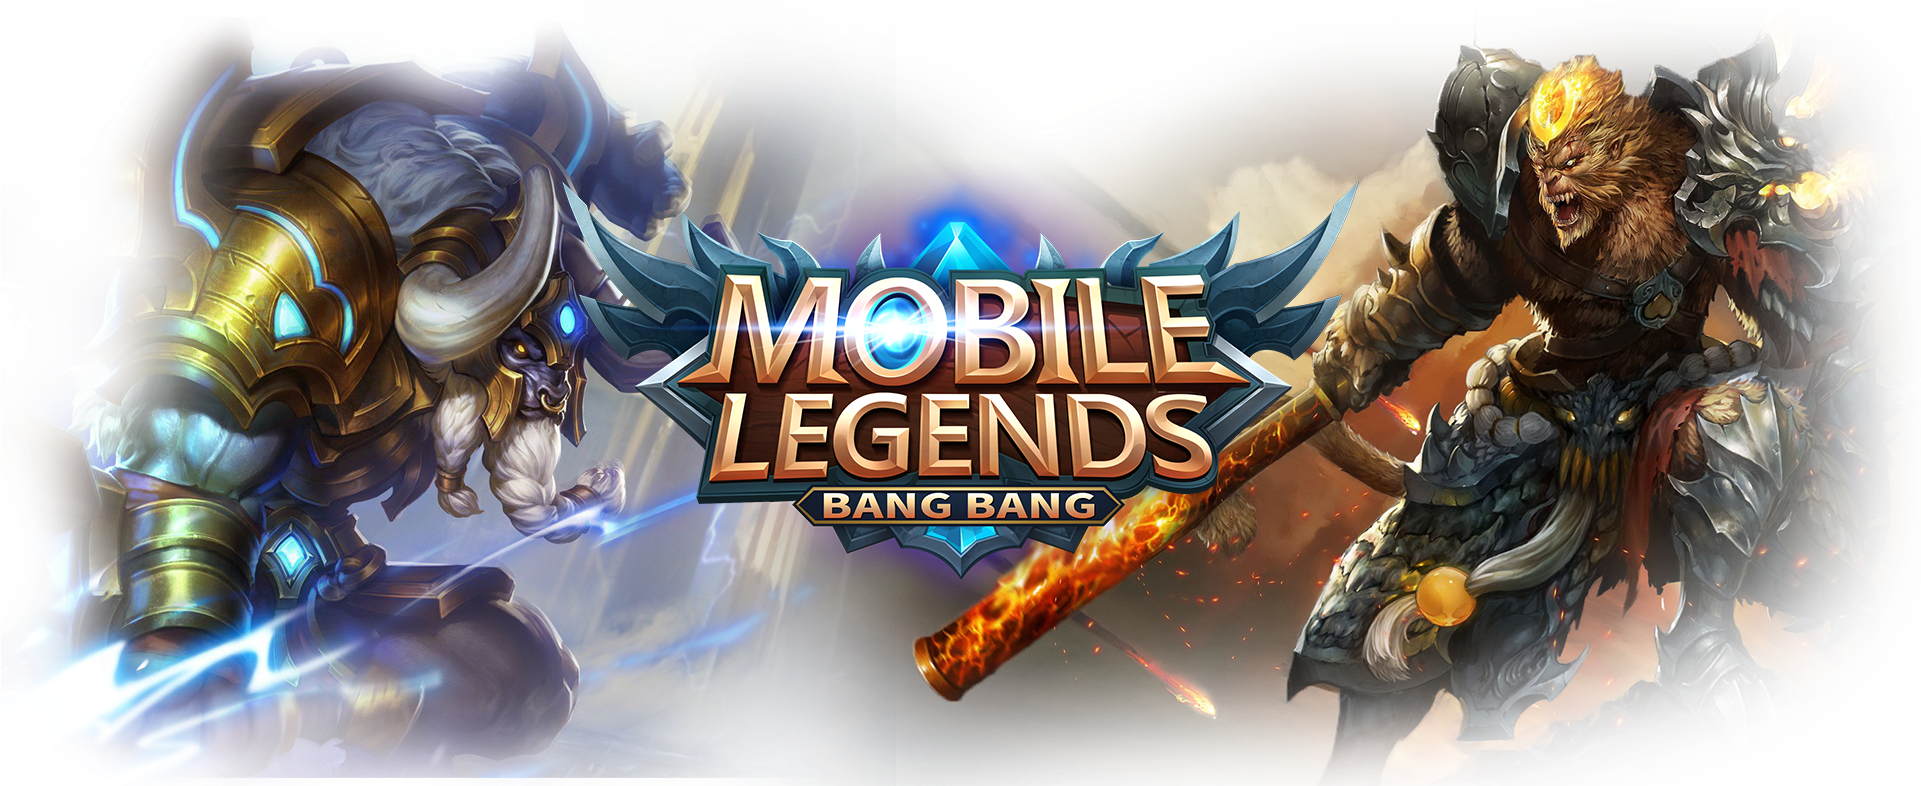 428 4280724 Mobile Legends Pc Game Clipart 